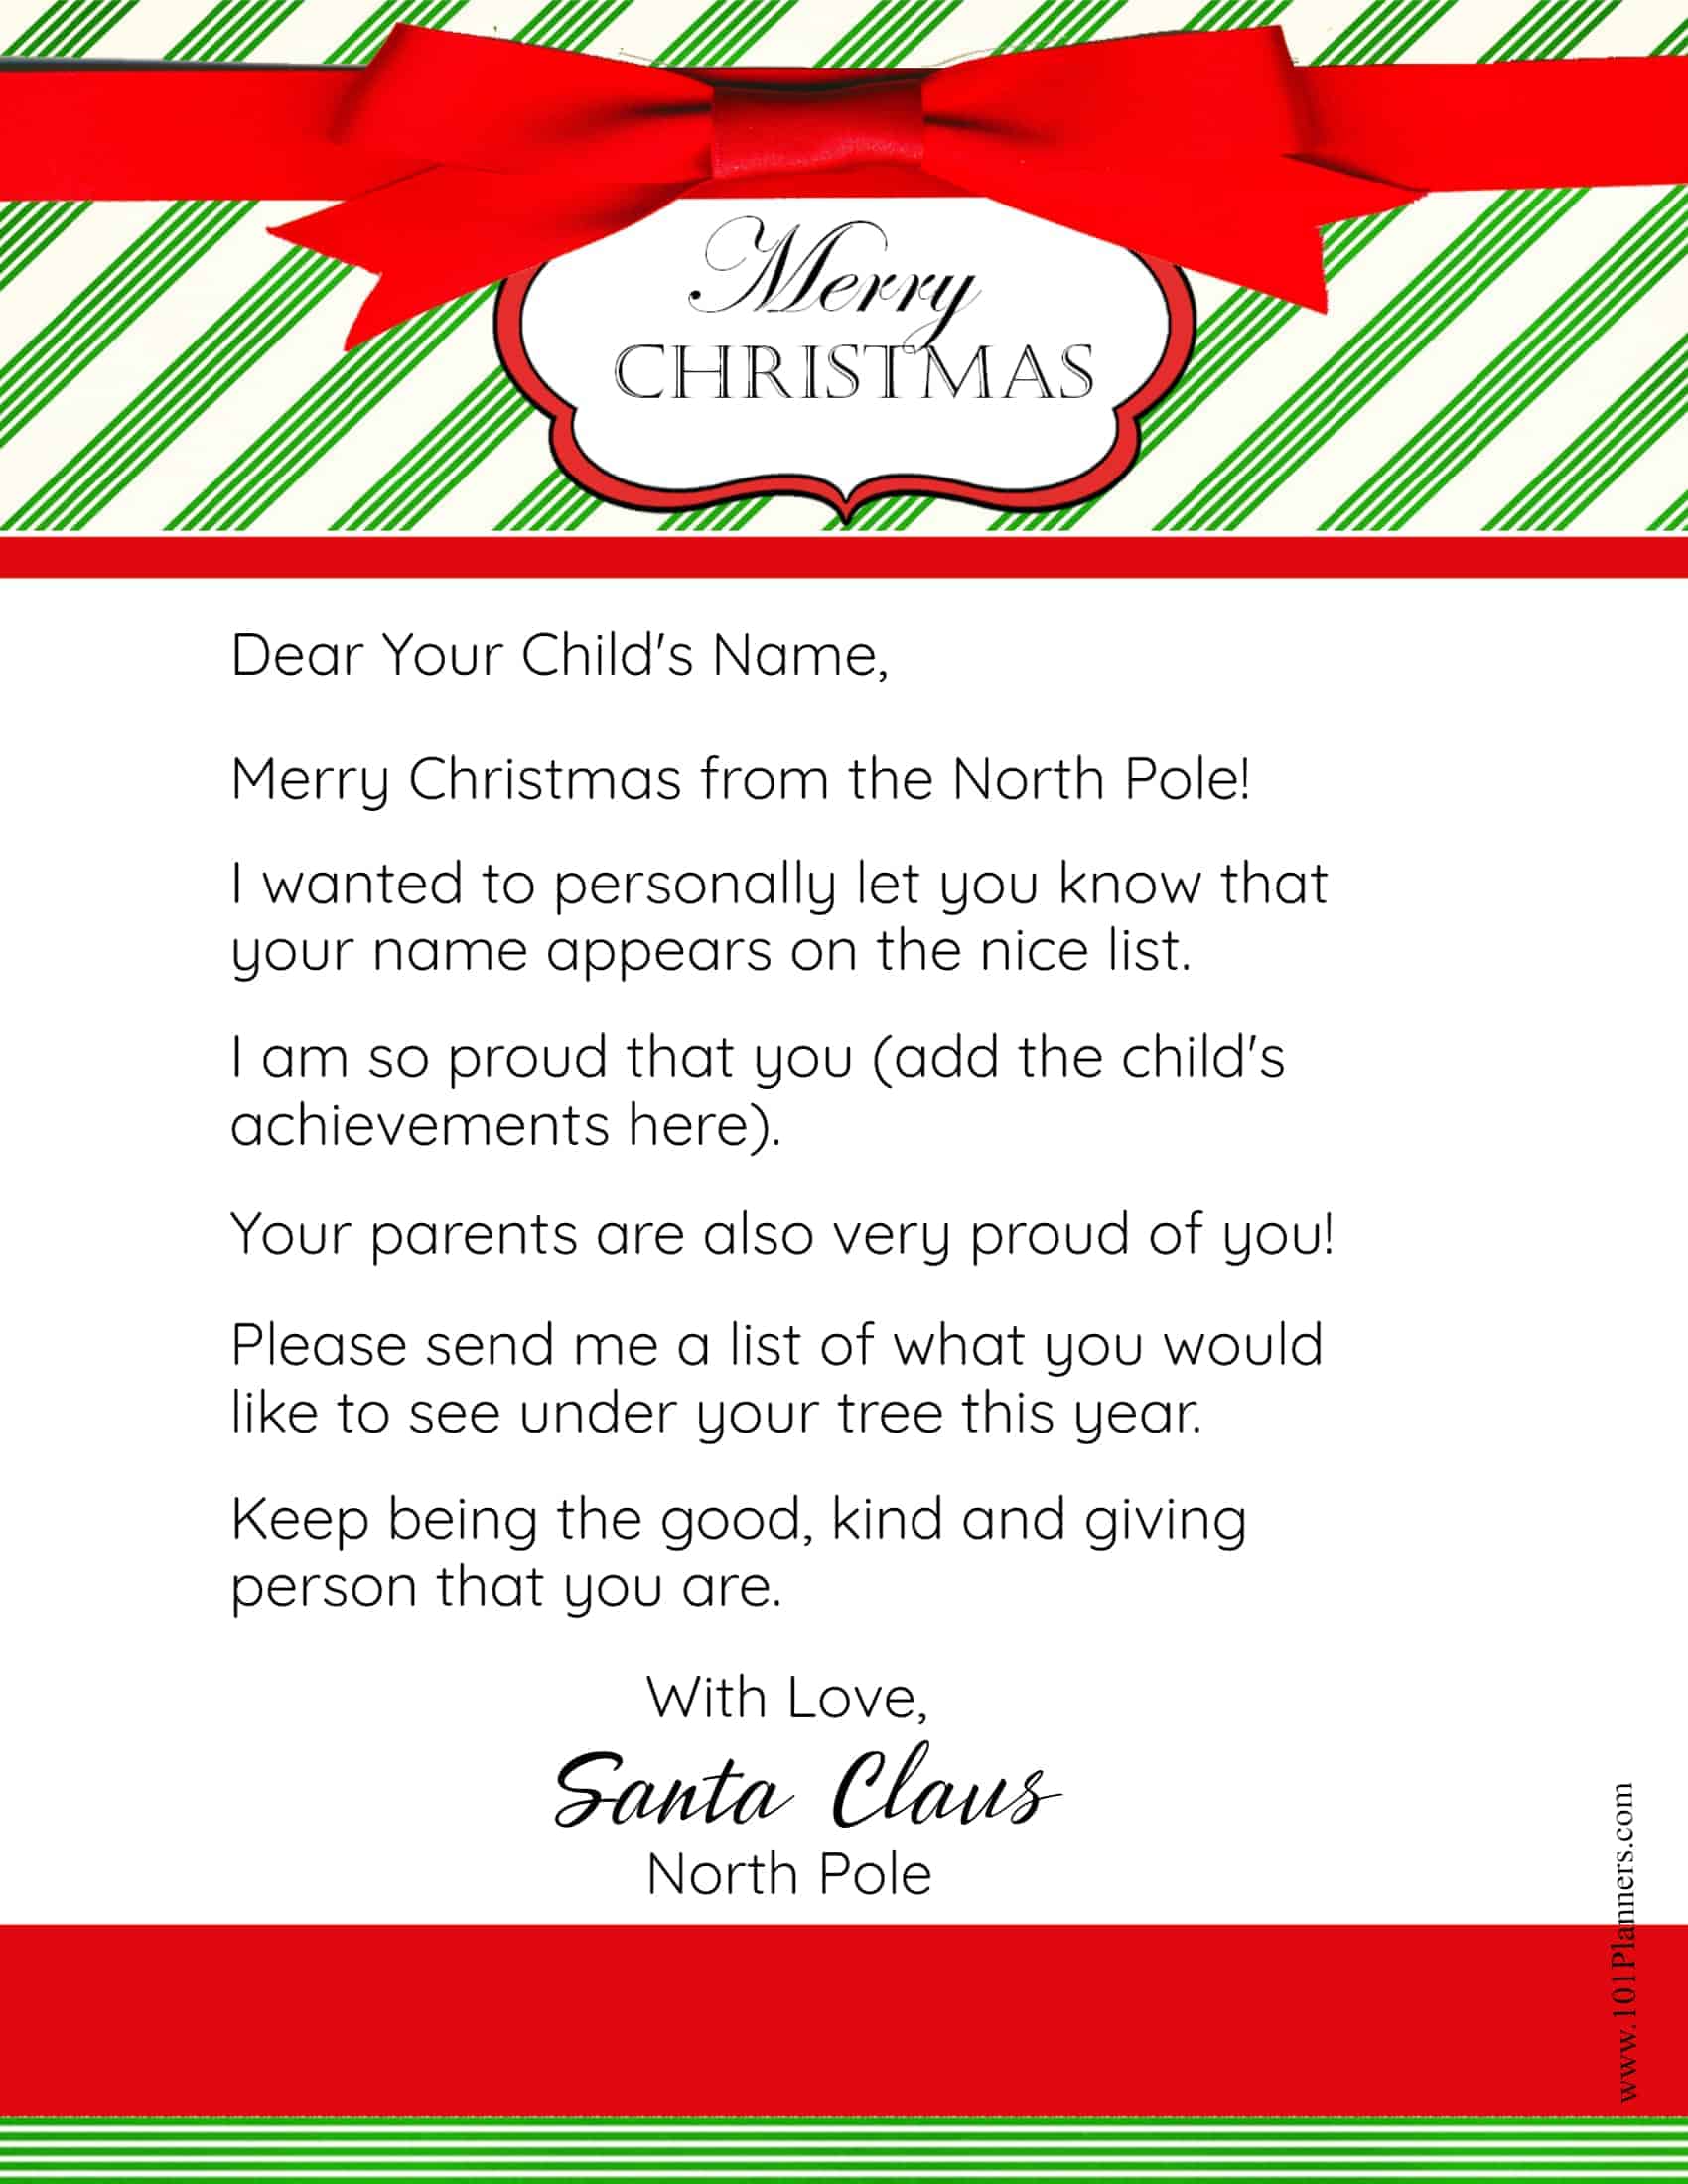 Letters From Santa Template Printable - Printable Templates